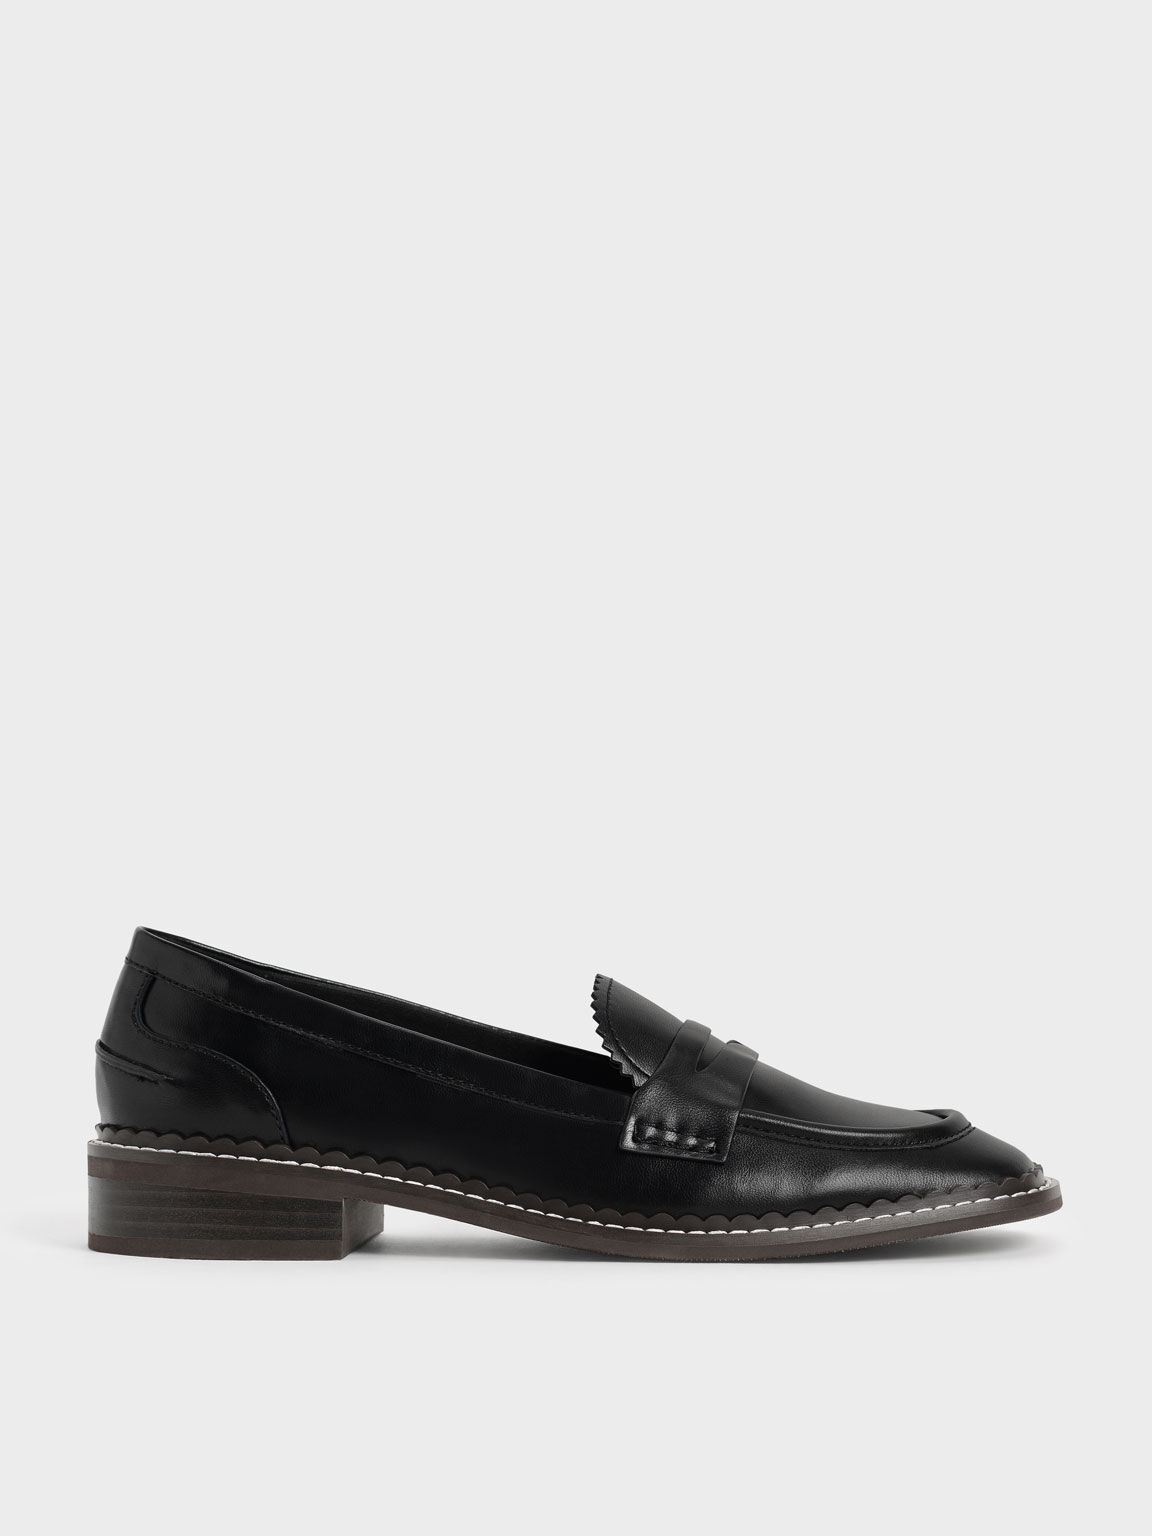 Scallop-Trim Penny Loafers, Black, hi-res